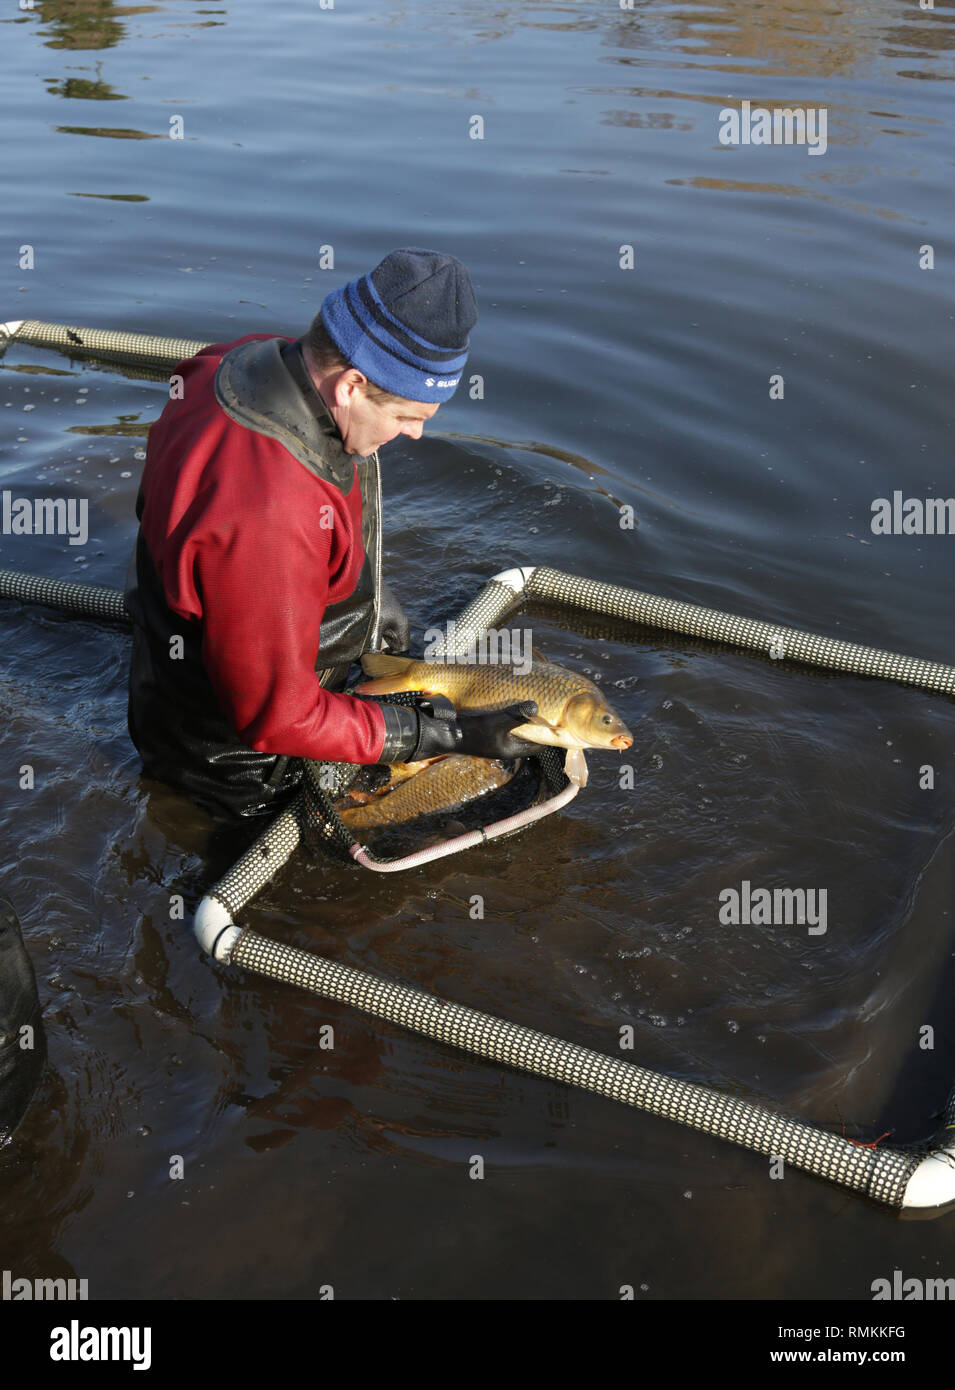 The Environment agency carrying out fish health checks in a lake in Mary Stevens park, Stourbridge, UK. Stock Photo